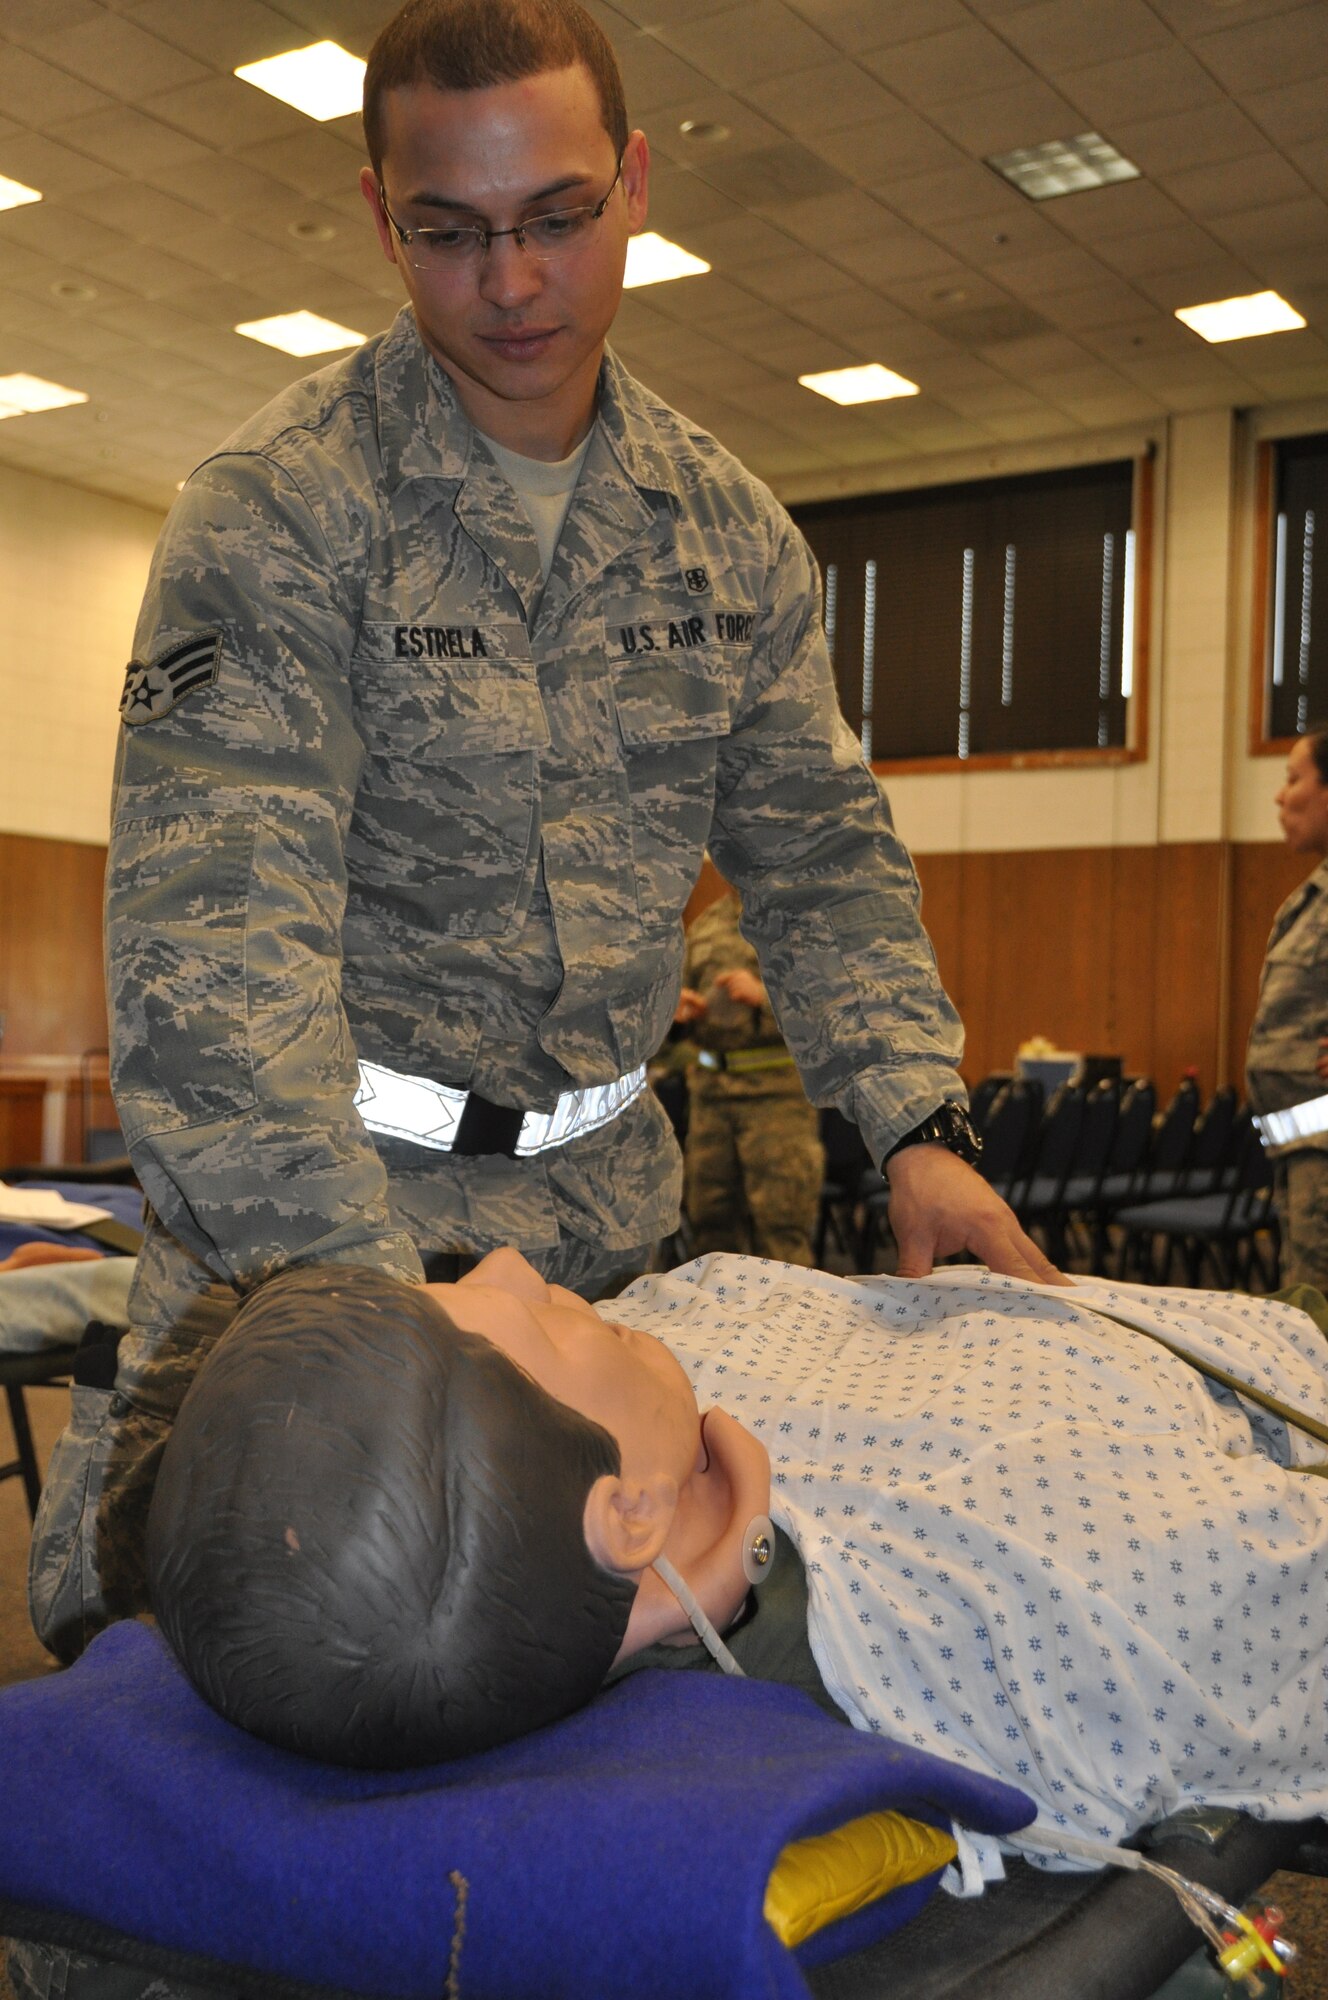 Senior Airman Jason Estrela, a medical technician, checks over a patient in the staging area to unsure that the patient’s condition is not deteriorating. The exercise mimicked emergency medical situation in the event of a disaster at Joint Base Andrews on Monday, May 4, 2015 (Air Force Photo / Senior Airman Kristin Kurtz)